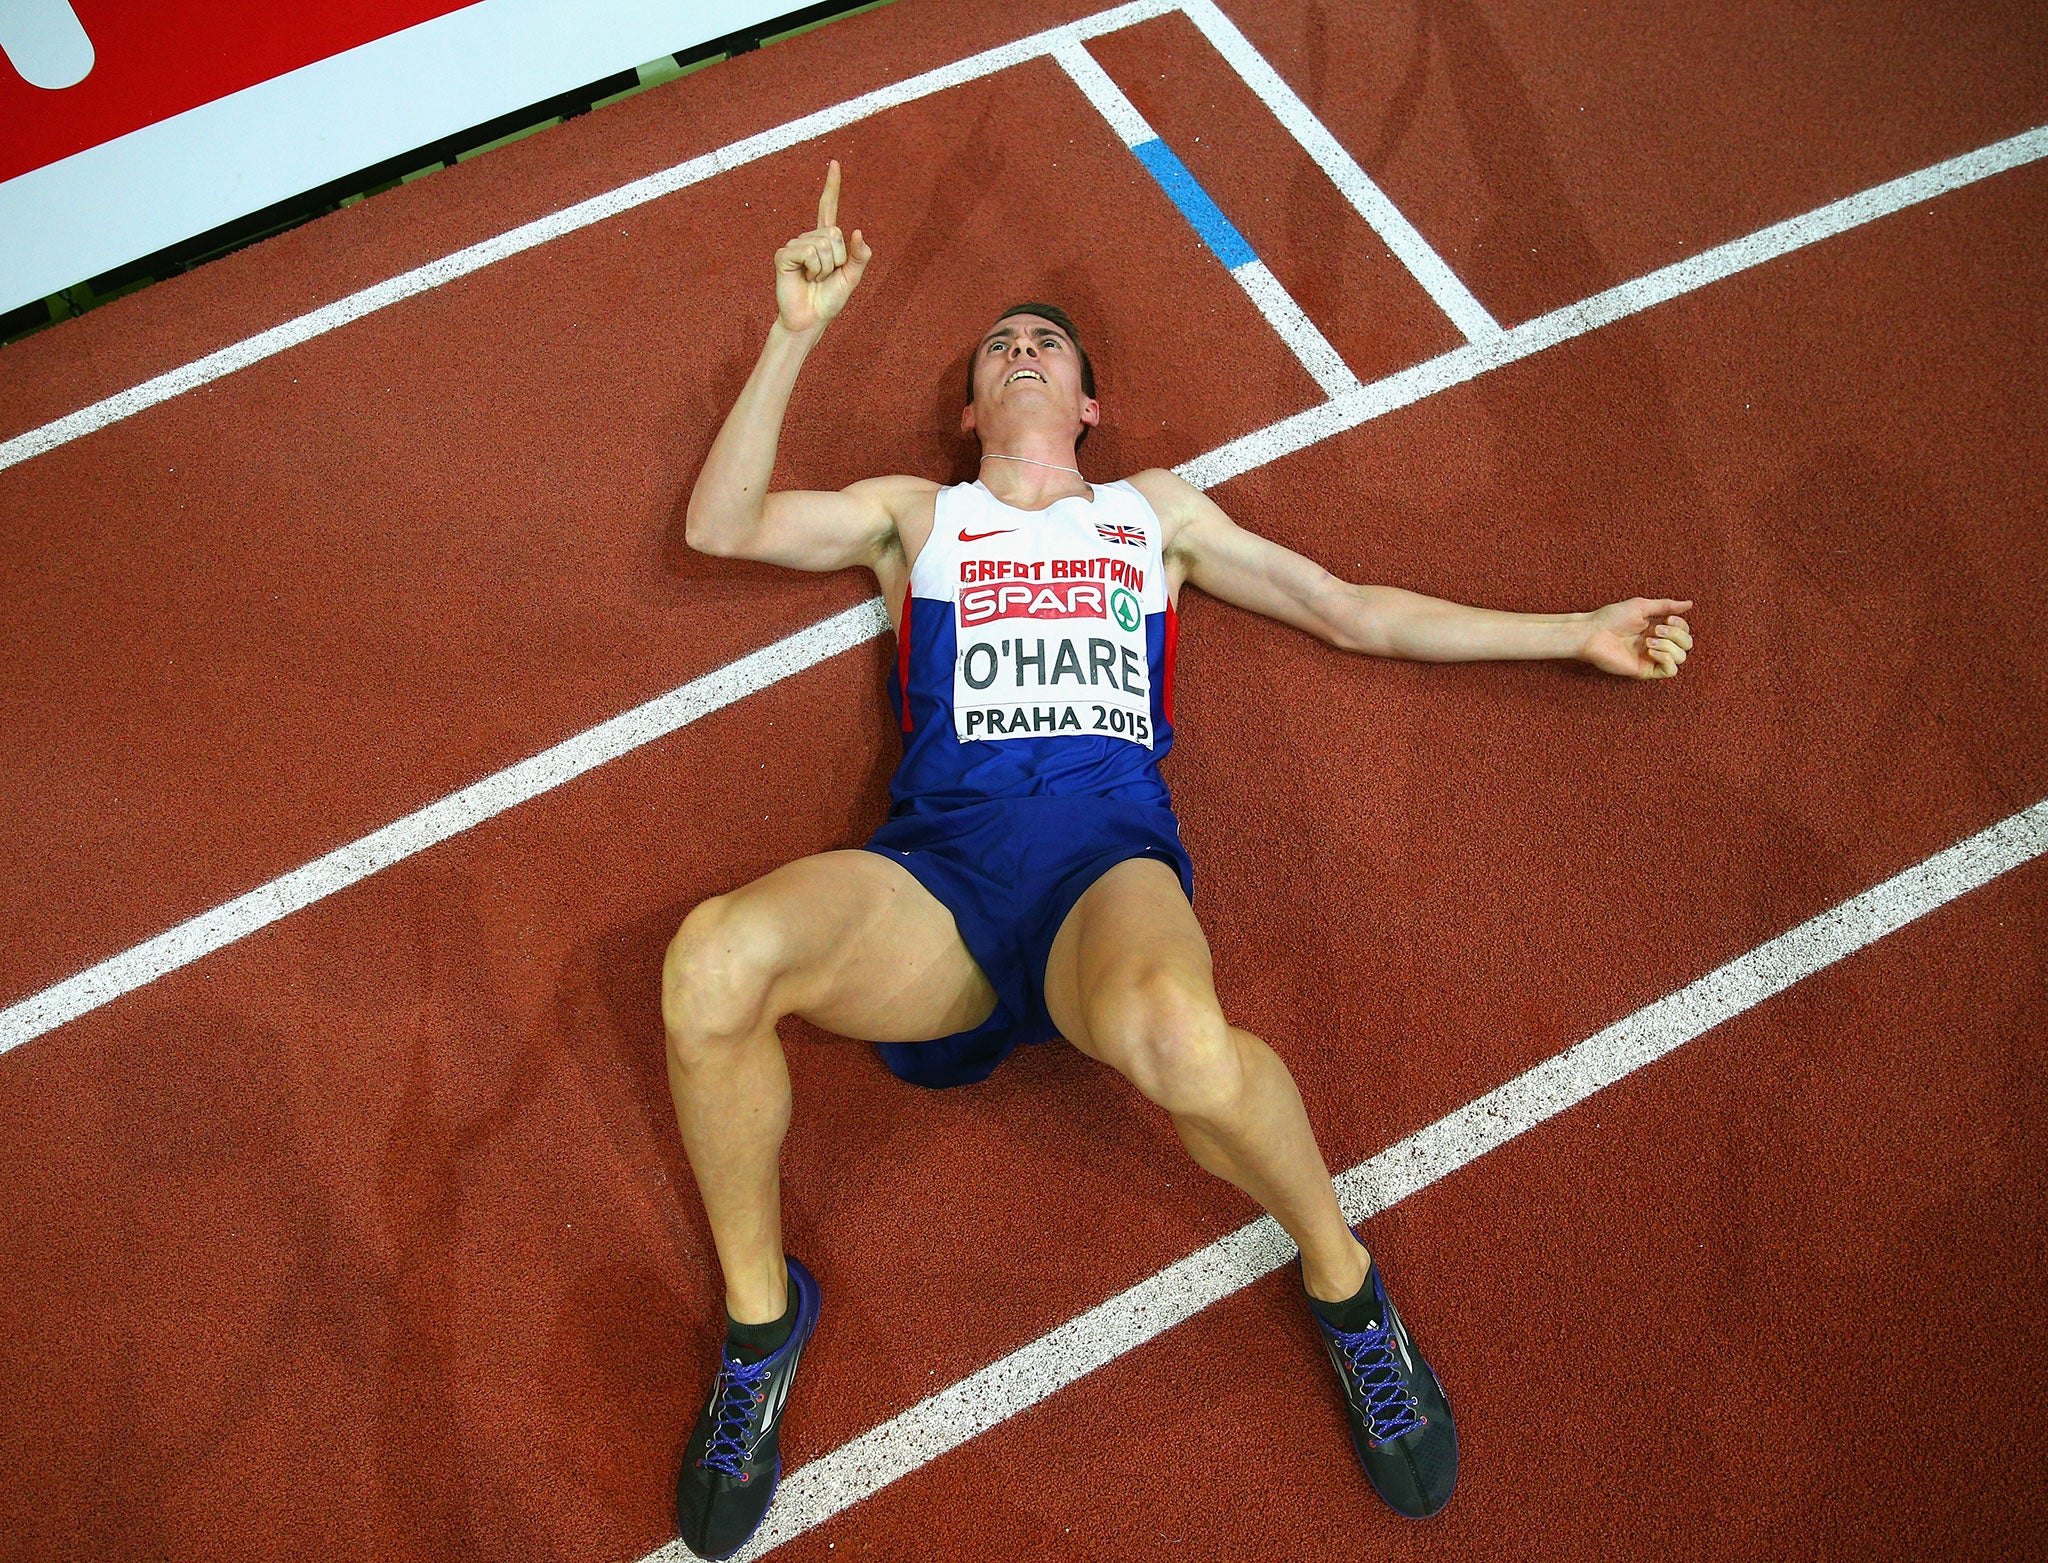 Chris O’Hare lies on the track after clinching 800m bronze